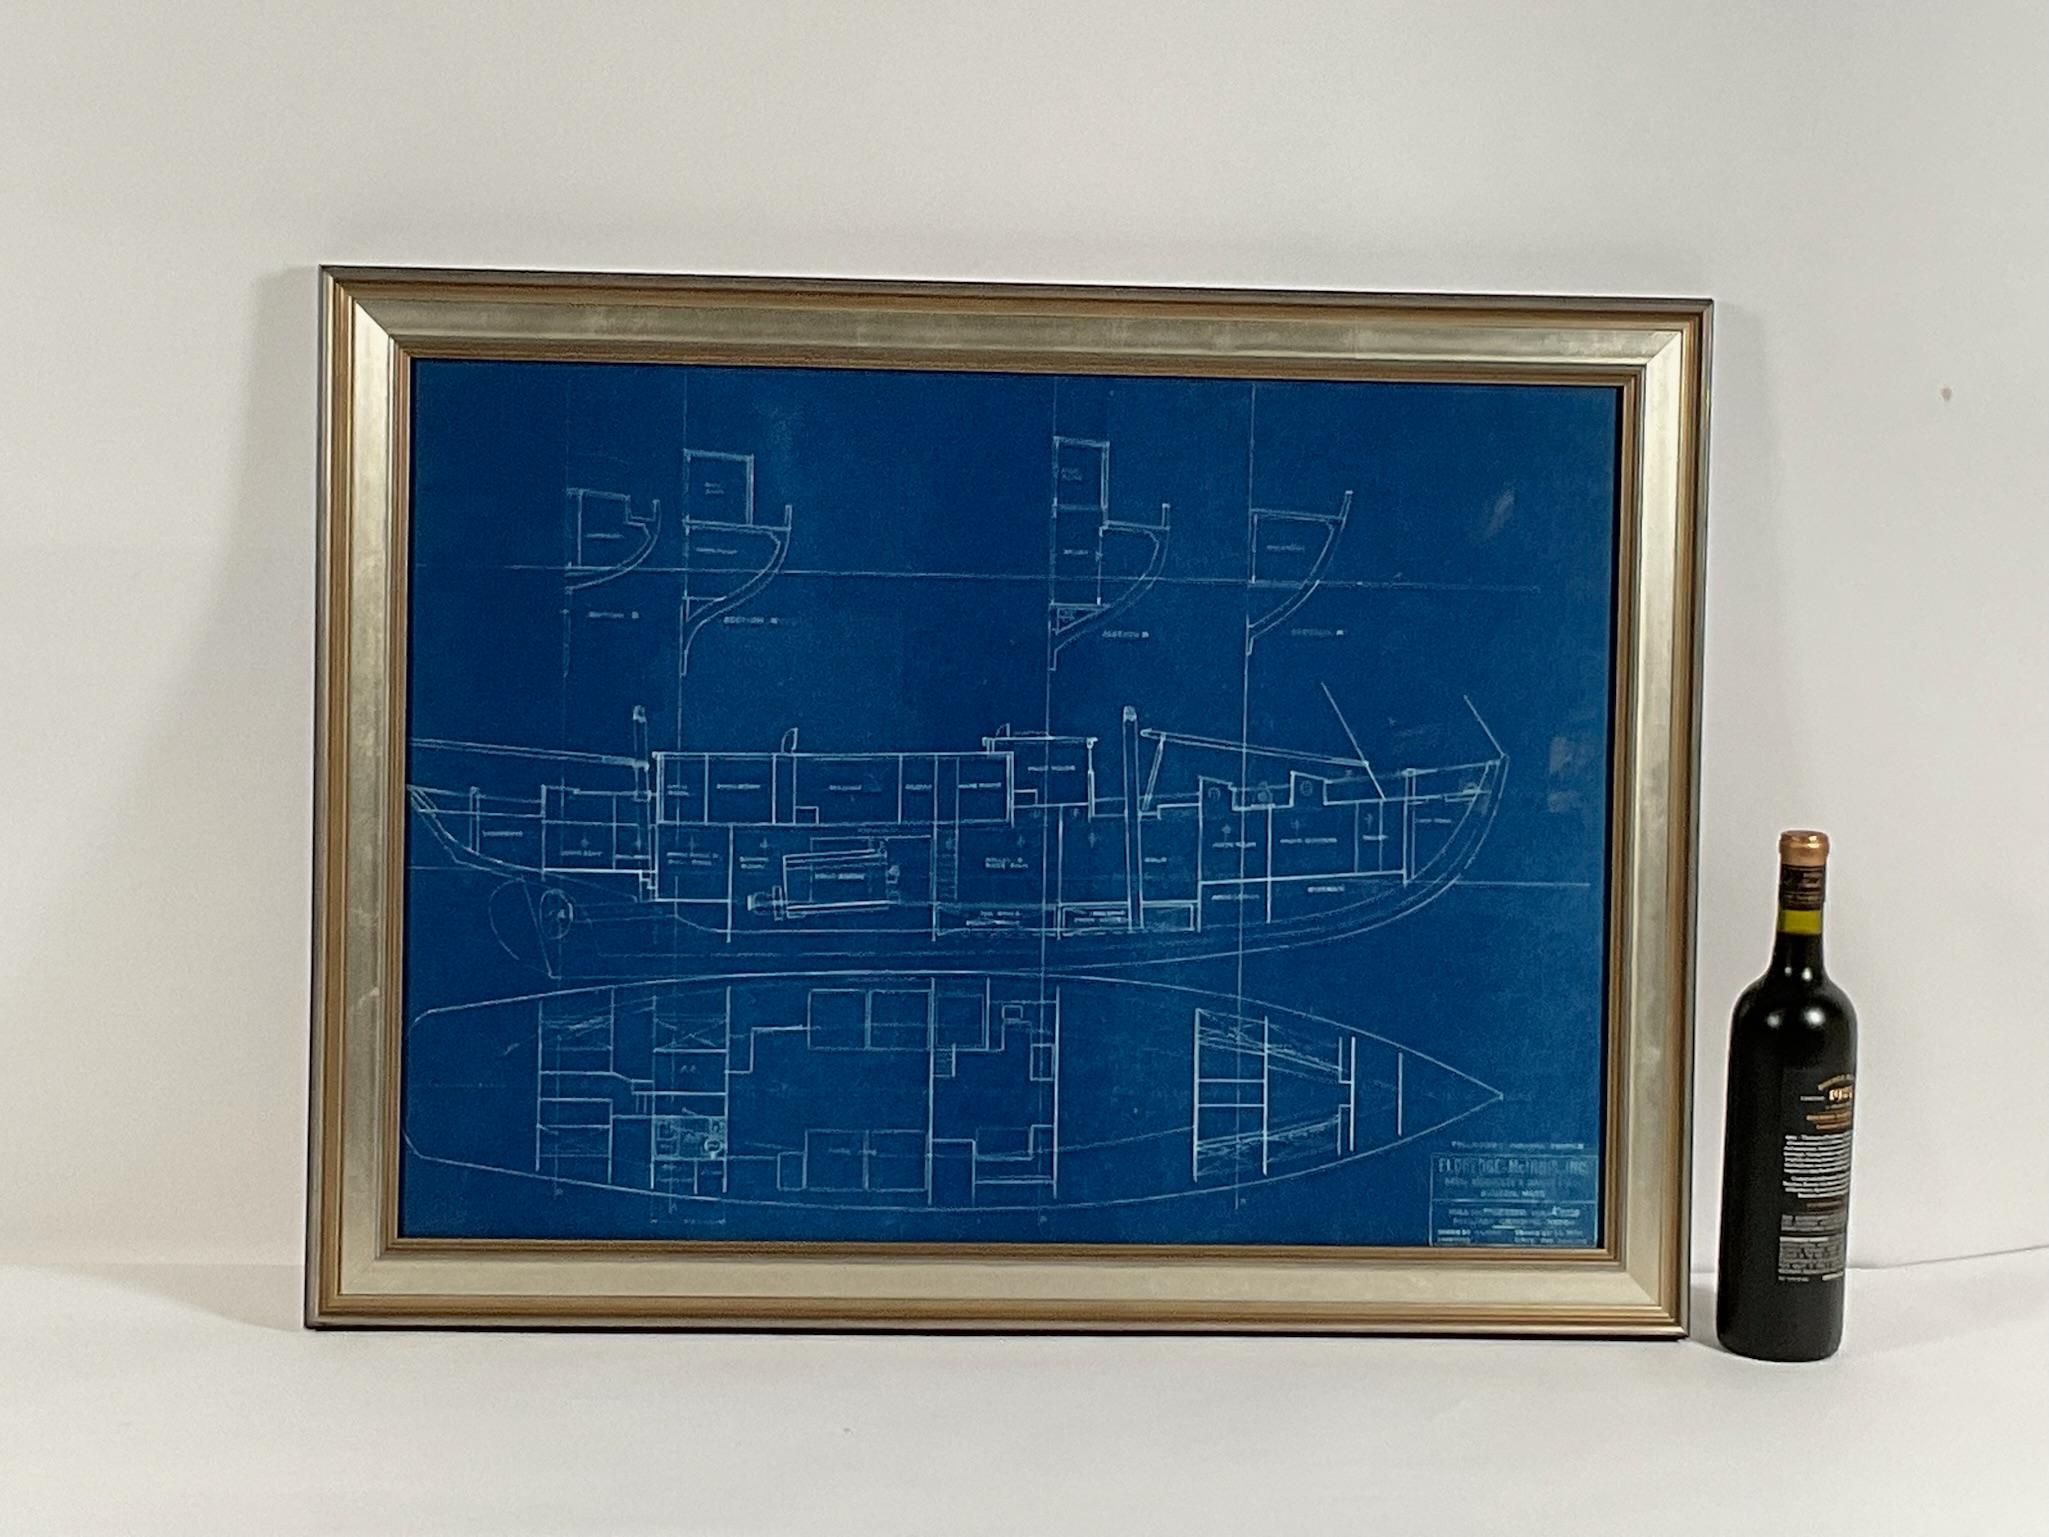 Rare yachting blueprint with legend plate showing the 